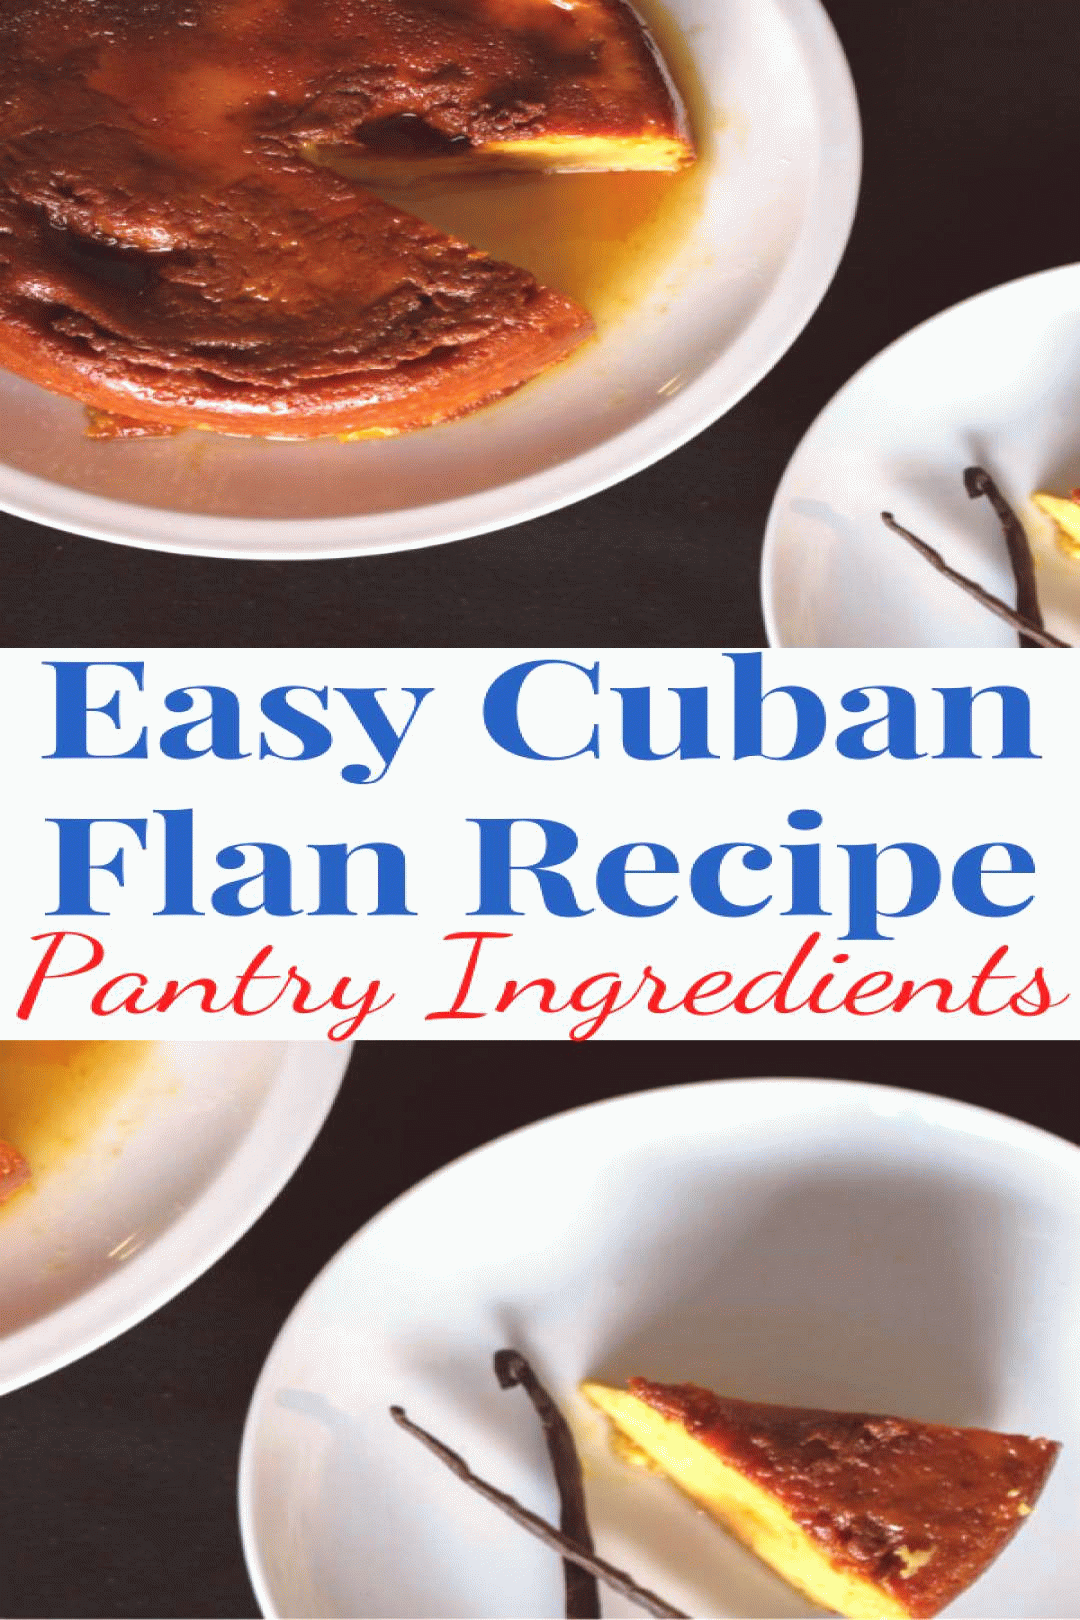 cuban flan recipe authentic try the delicious sweetness of caramel coating on side in 2020 gif